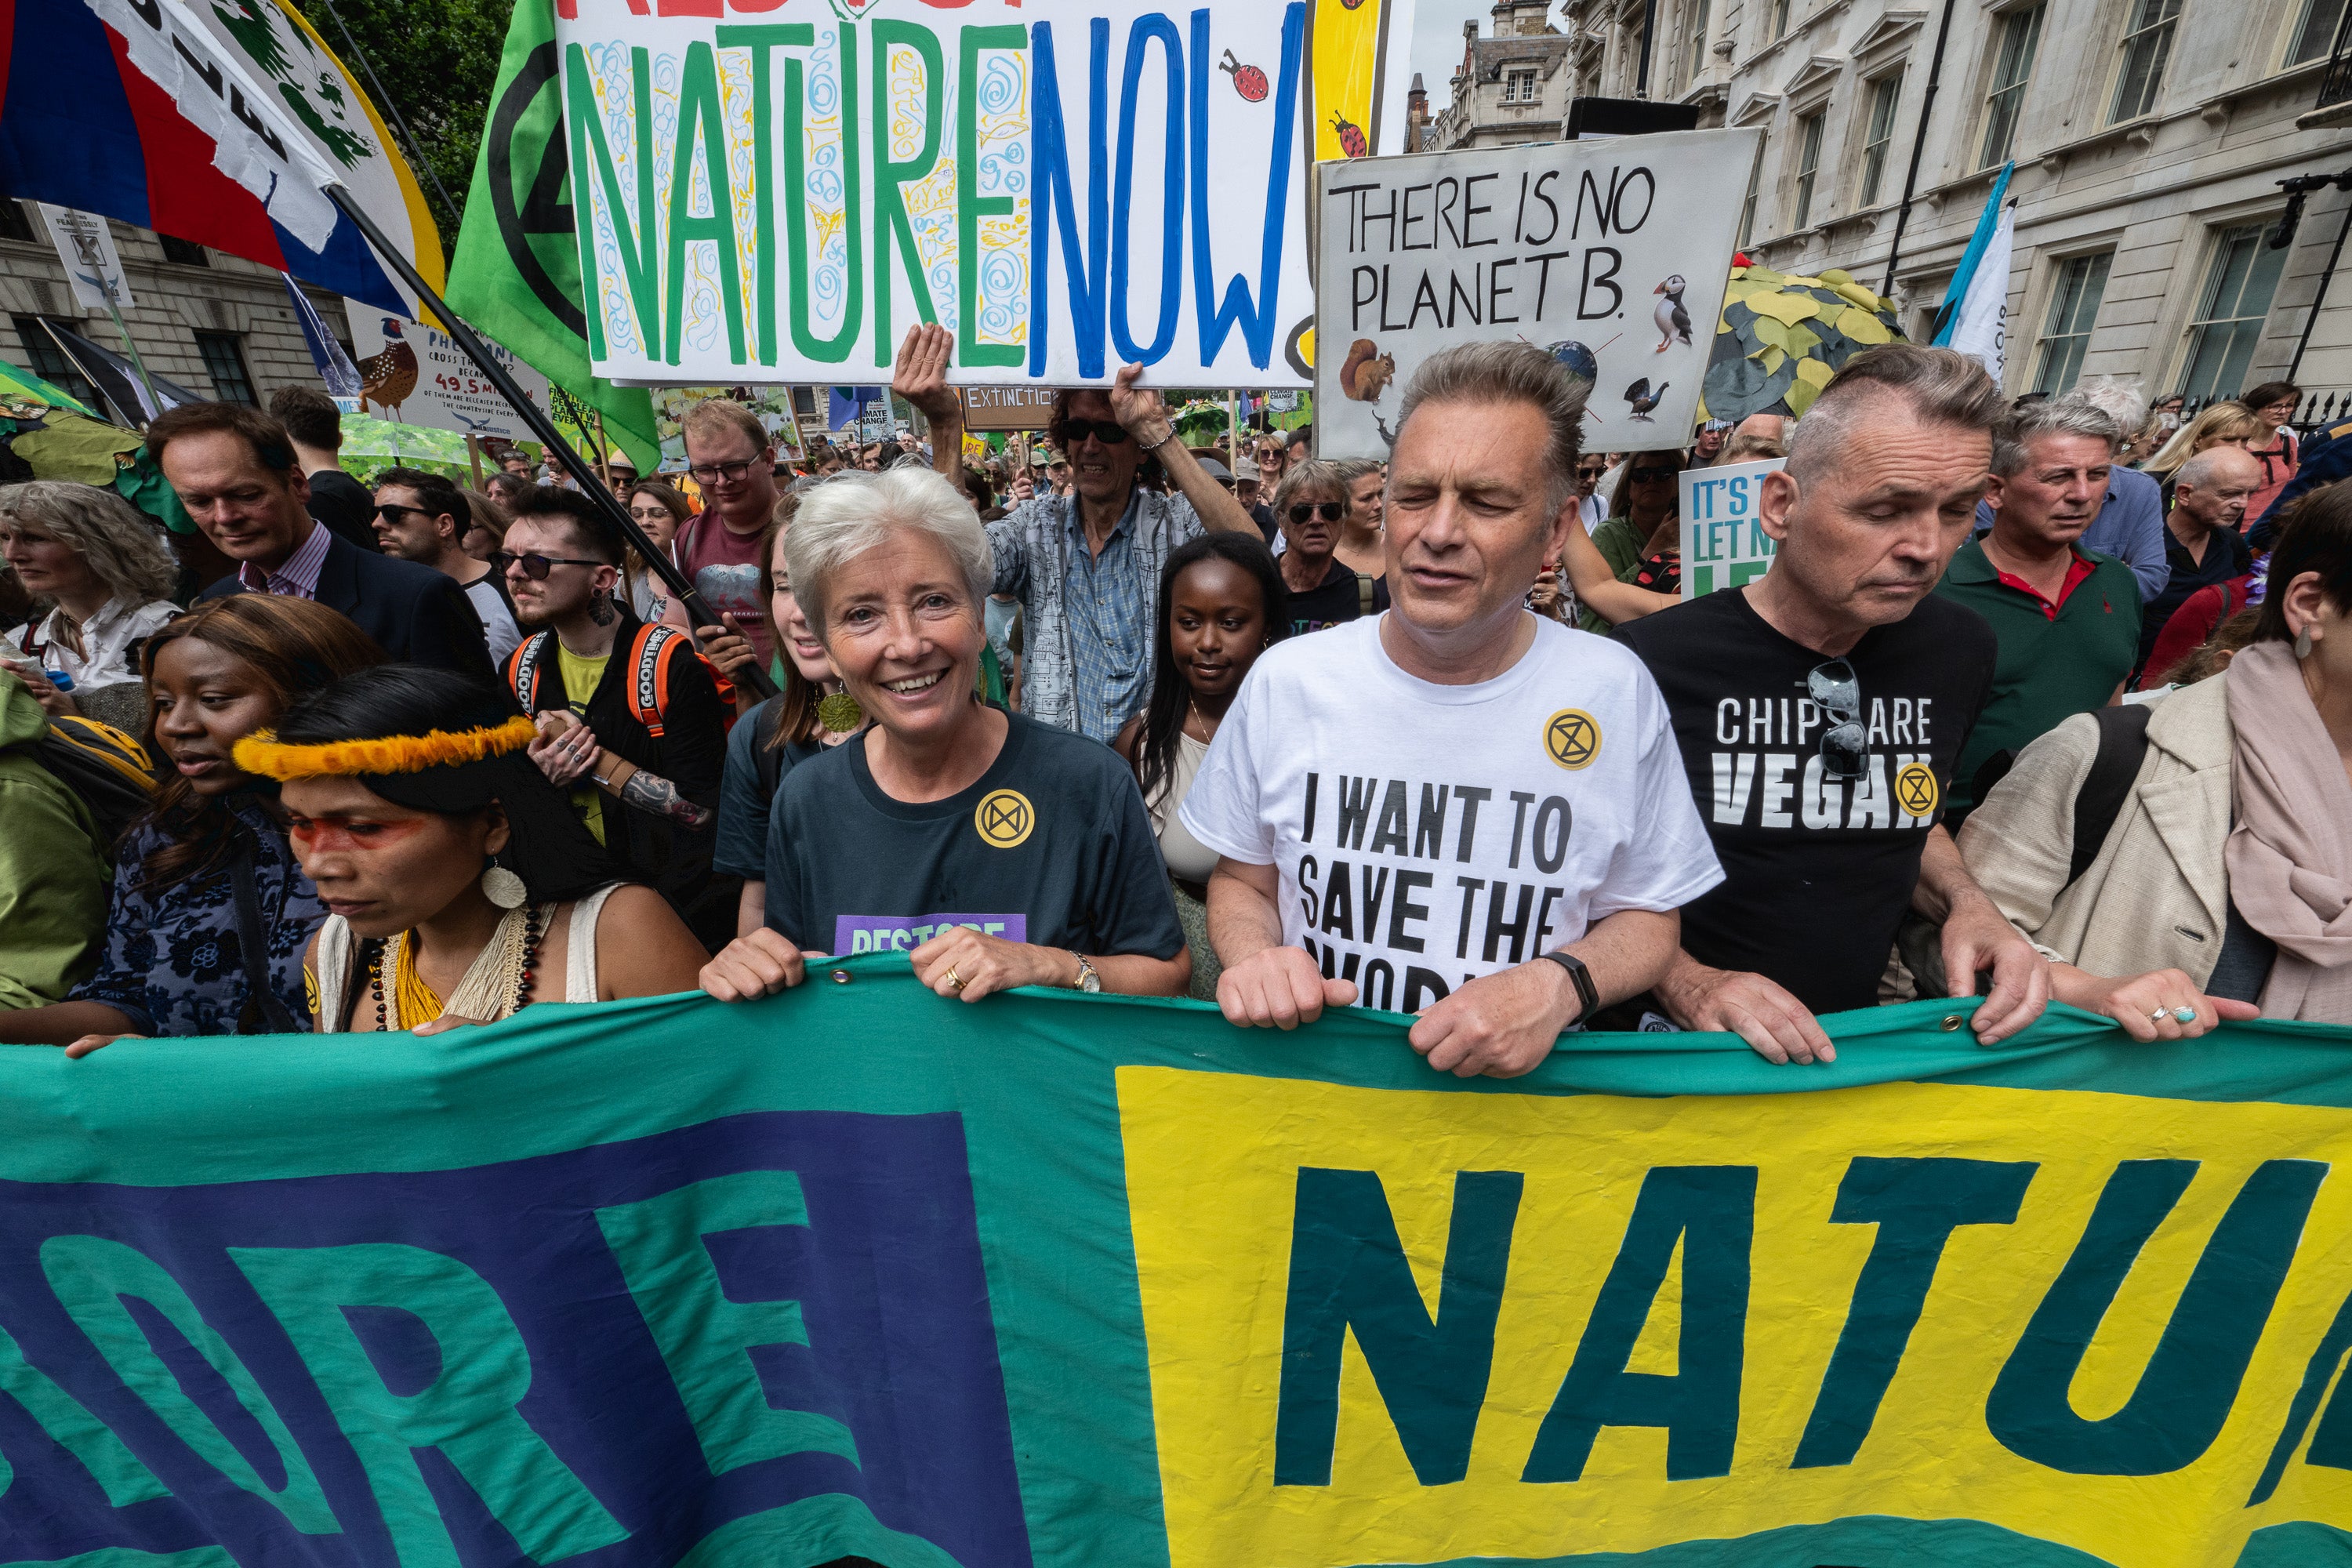 Chris Packham and Dame Emma Thompson were among those at the front of the march